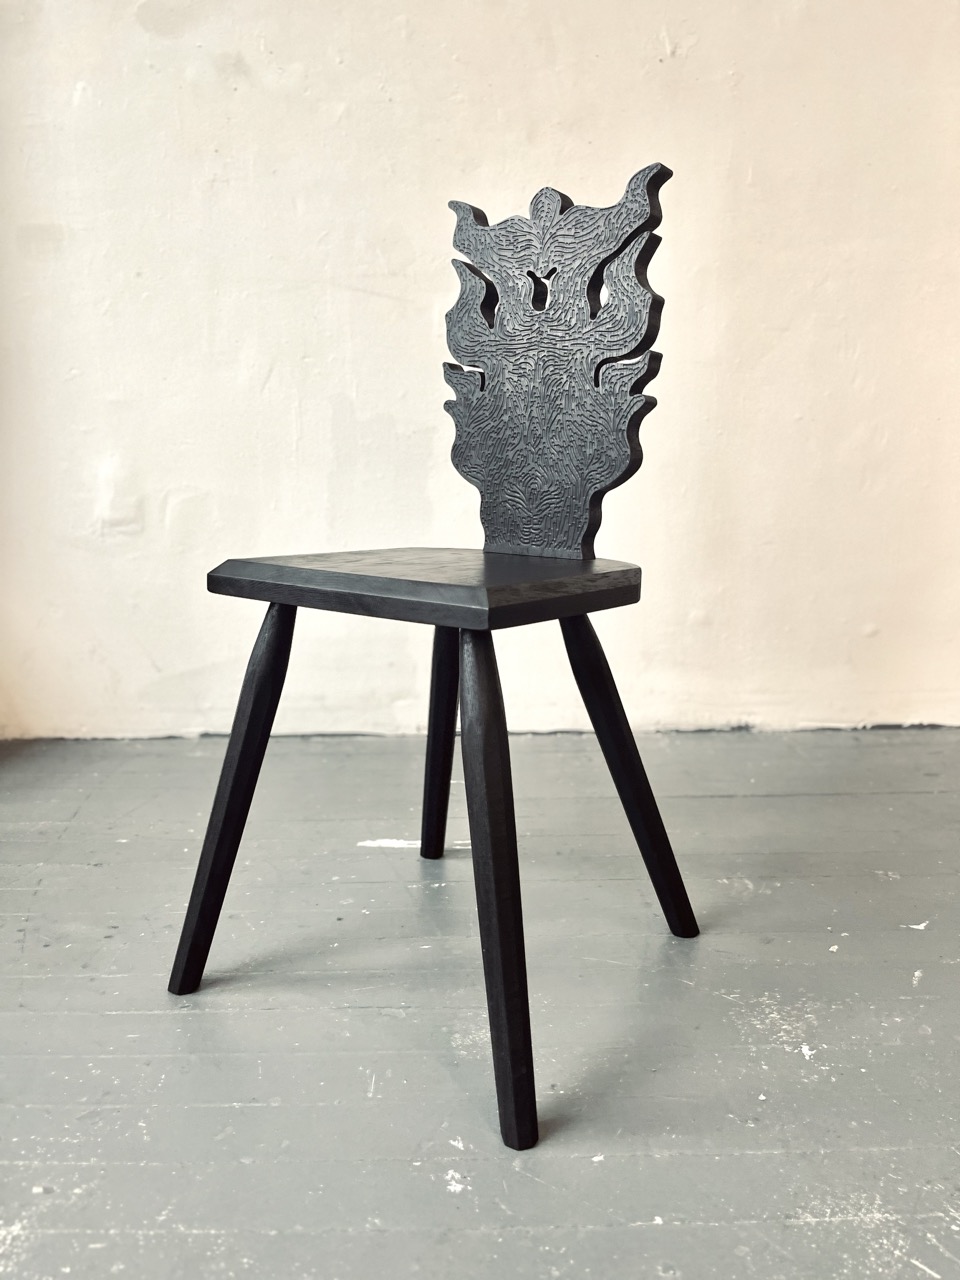 /A%20black%20chair%20stands%20on%20a%20wooden%20floor.%20The%20base%20of%20the%20chair%20is%20simple%2C%20utilitarian%20and%20the%20back%20is%20intricately%20carved.